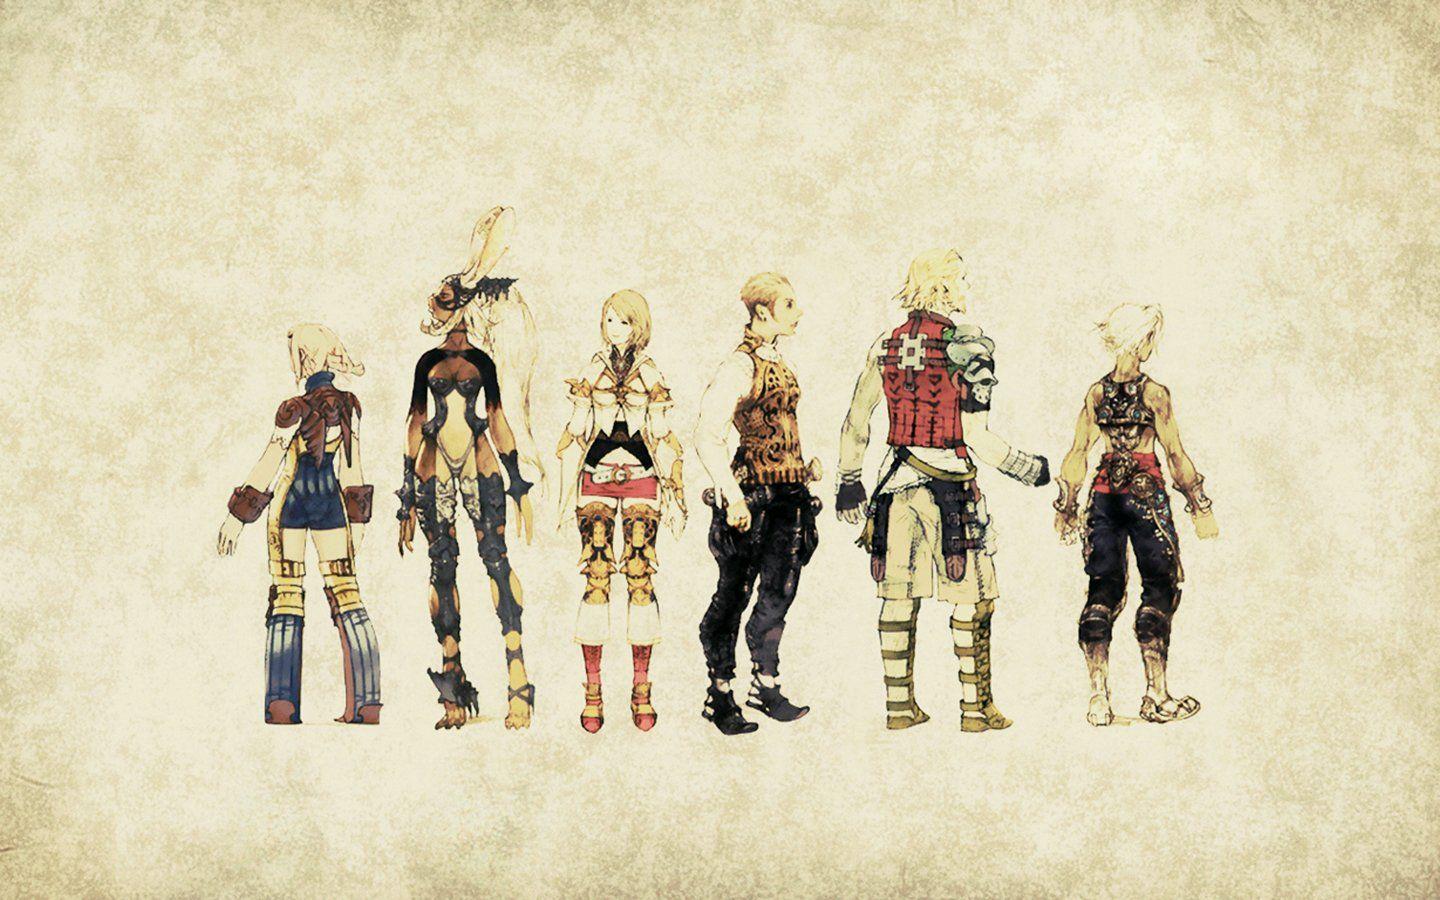 Final Fantasy XII Wallpaper and Background Imagex900